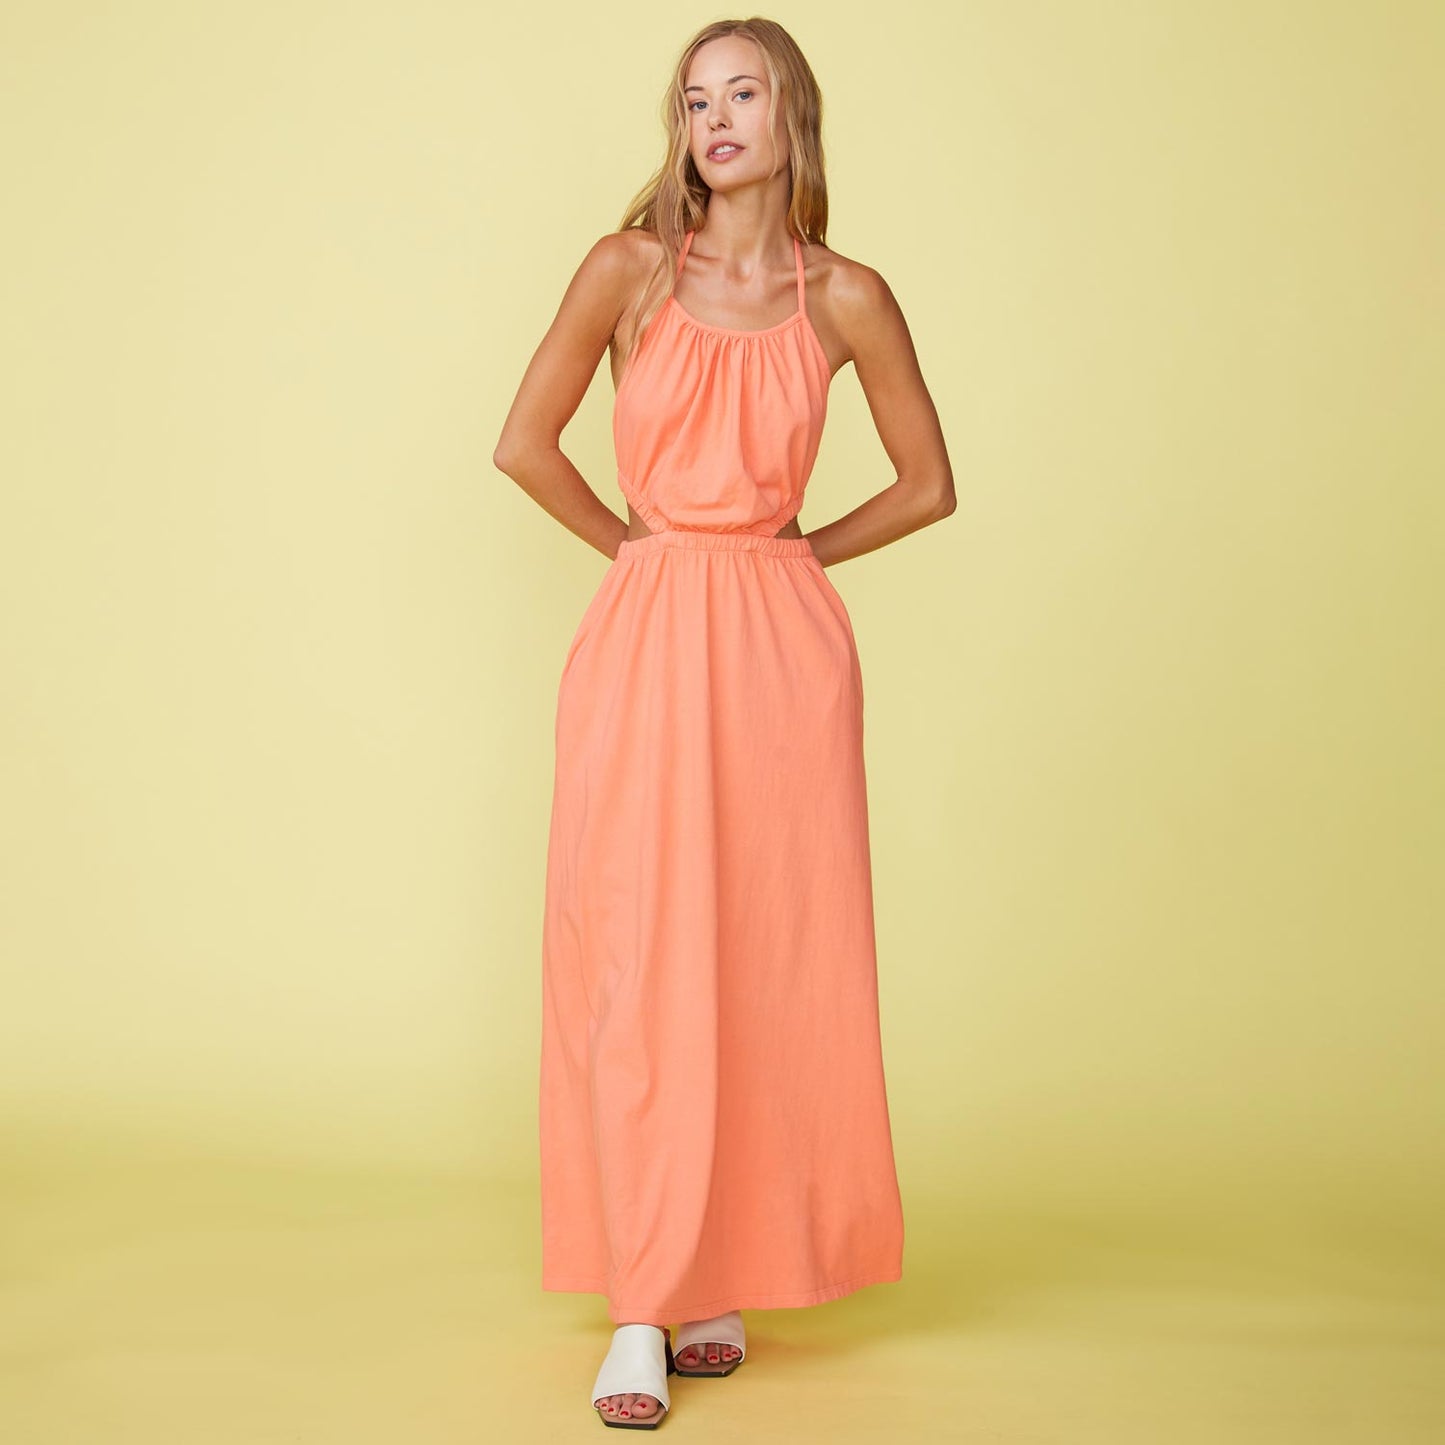 Front View of model wearing the Cut Out Halter Dress in Georgia Peach.